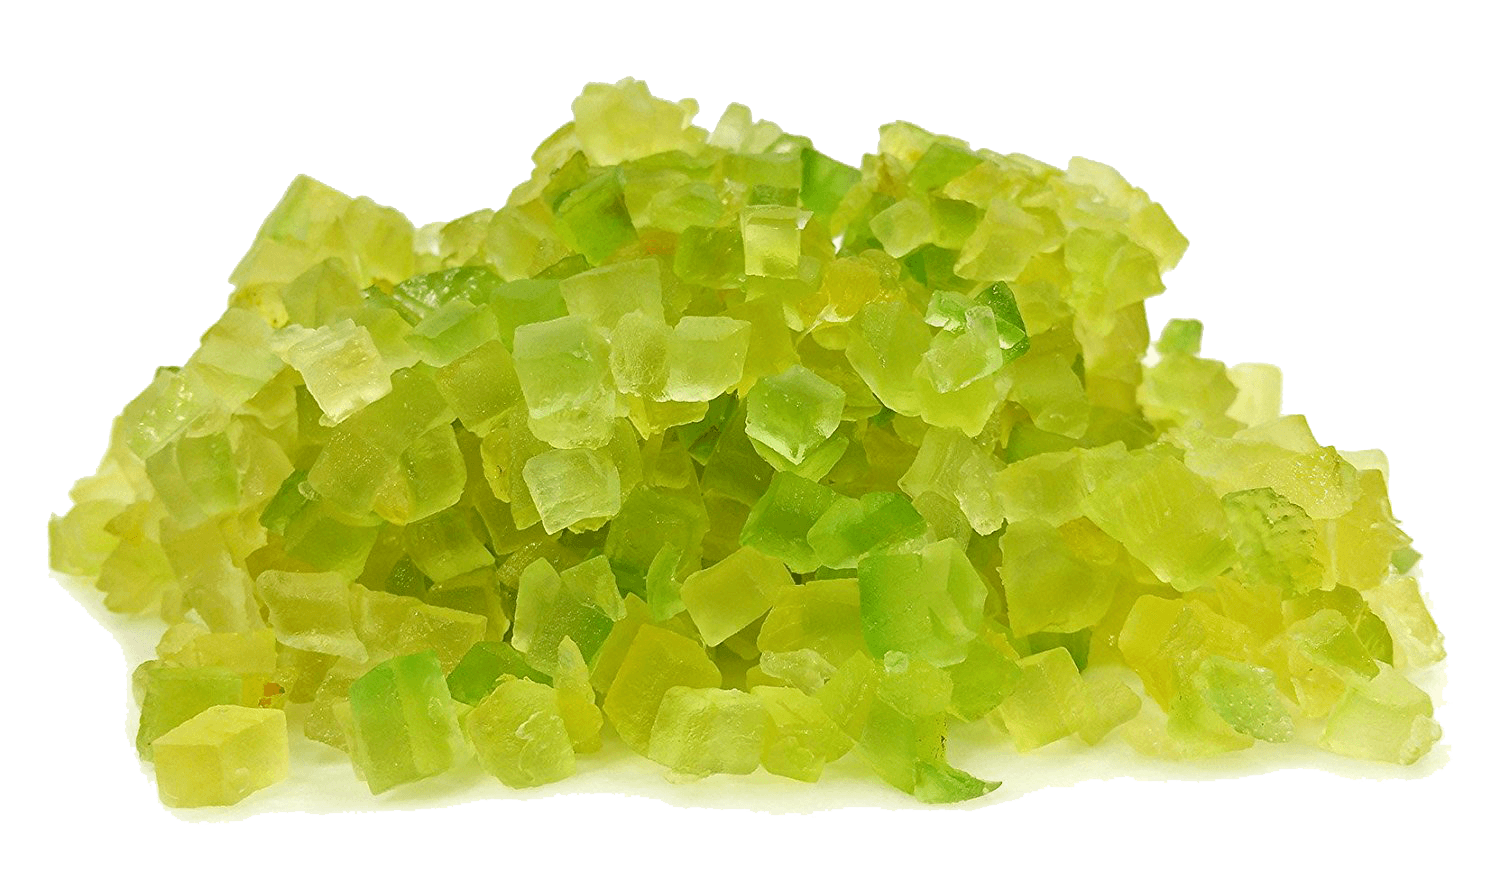  Hand Cubed Candied Citron (Cedro) 12 Ounce Container - Free Shipping